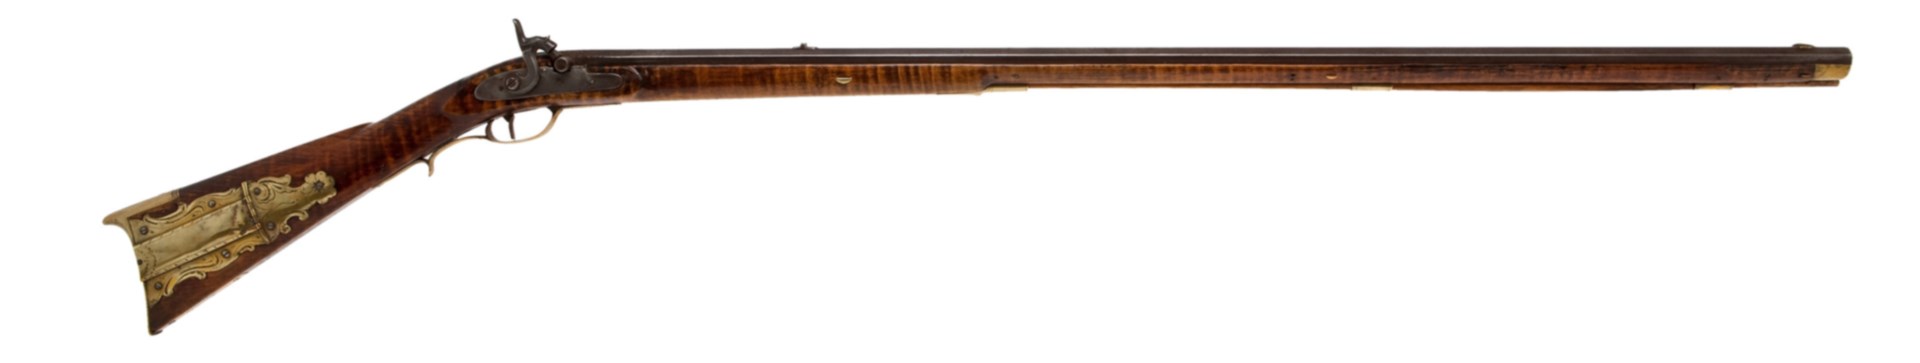 1830 Lancaster County Pennsylvania Percussion Full Stock Rifle. 41", full octagonal, .45 caliber smoothbore barrel with smooth deep dark patina with just some pitting at the breech. The barrel is signed with the script initials "A. R." V notch rear, brass blade front, sights, both on dovetailed bases. Unsigned lock with simple decorative engraving. “Courtesy Heritage Auctions”